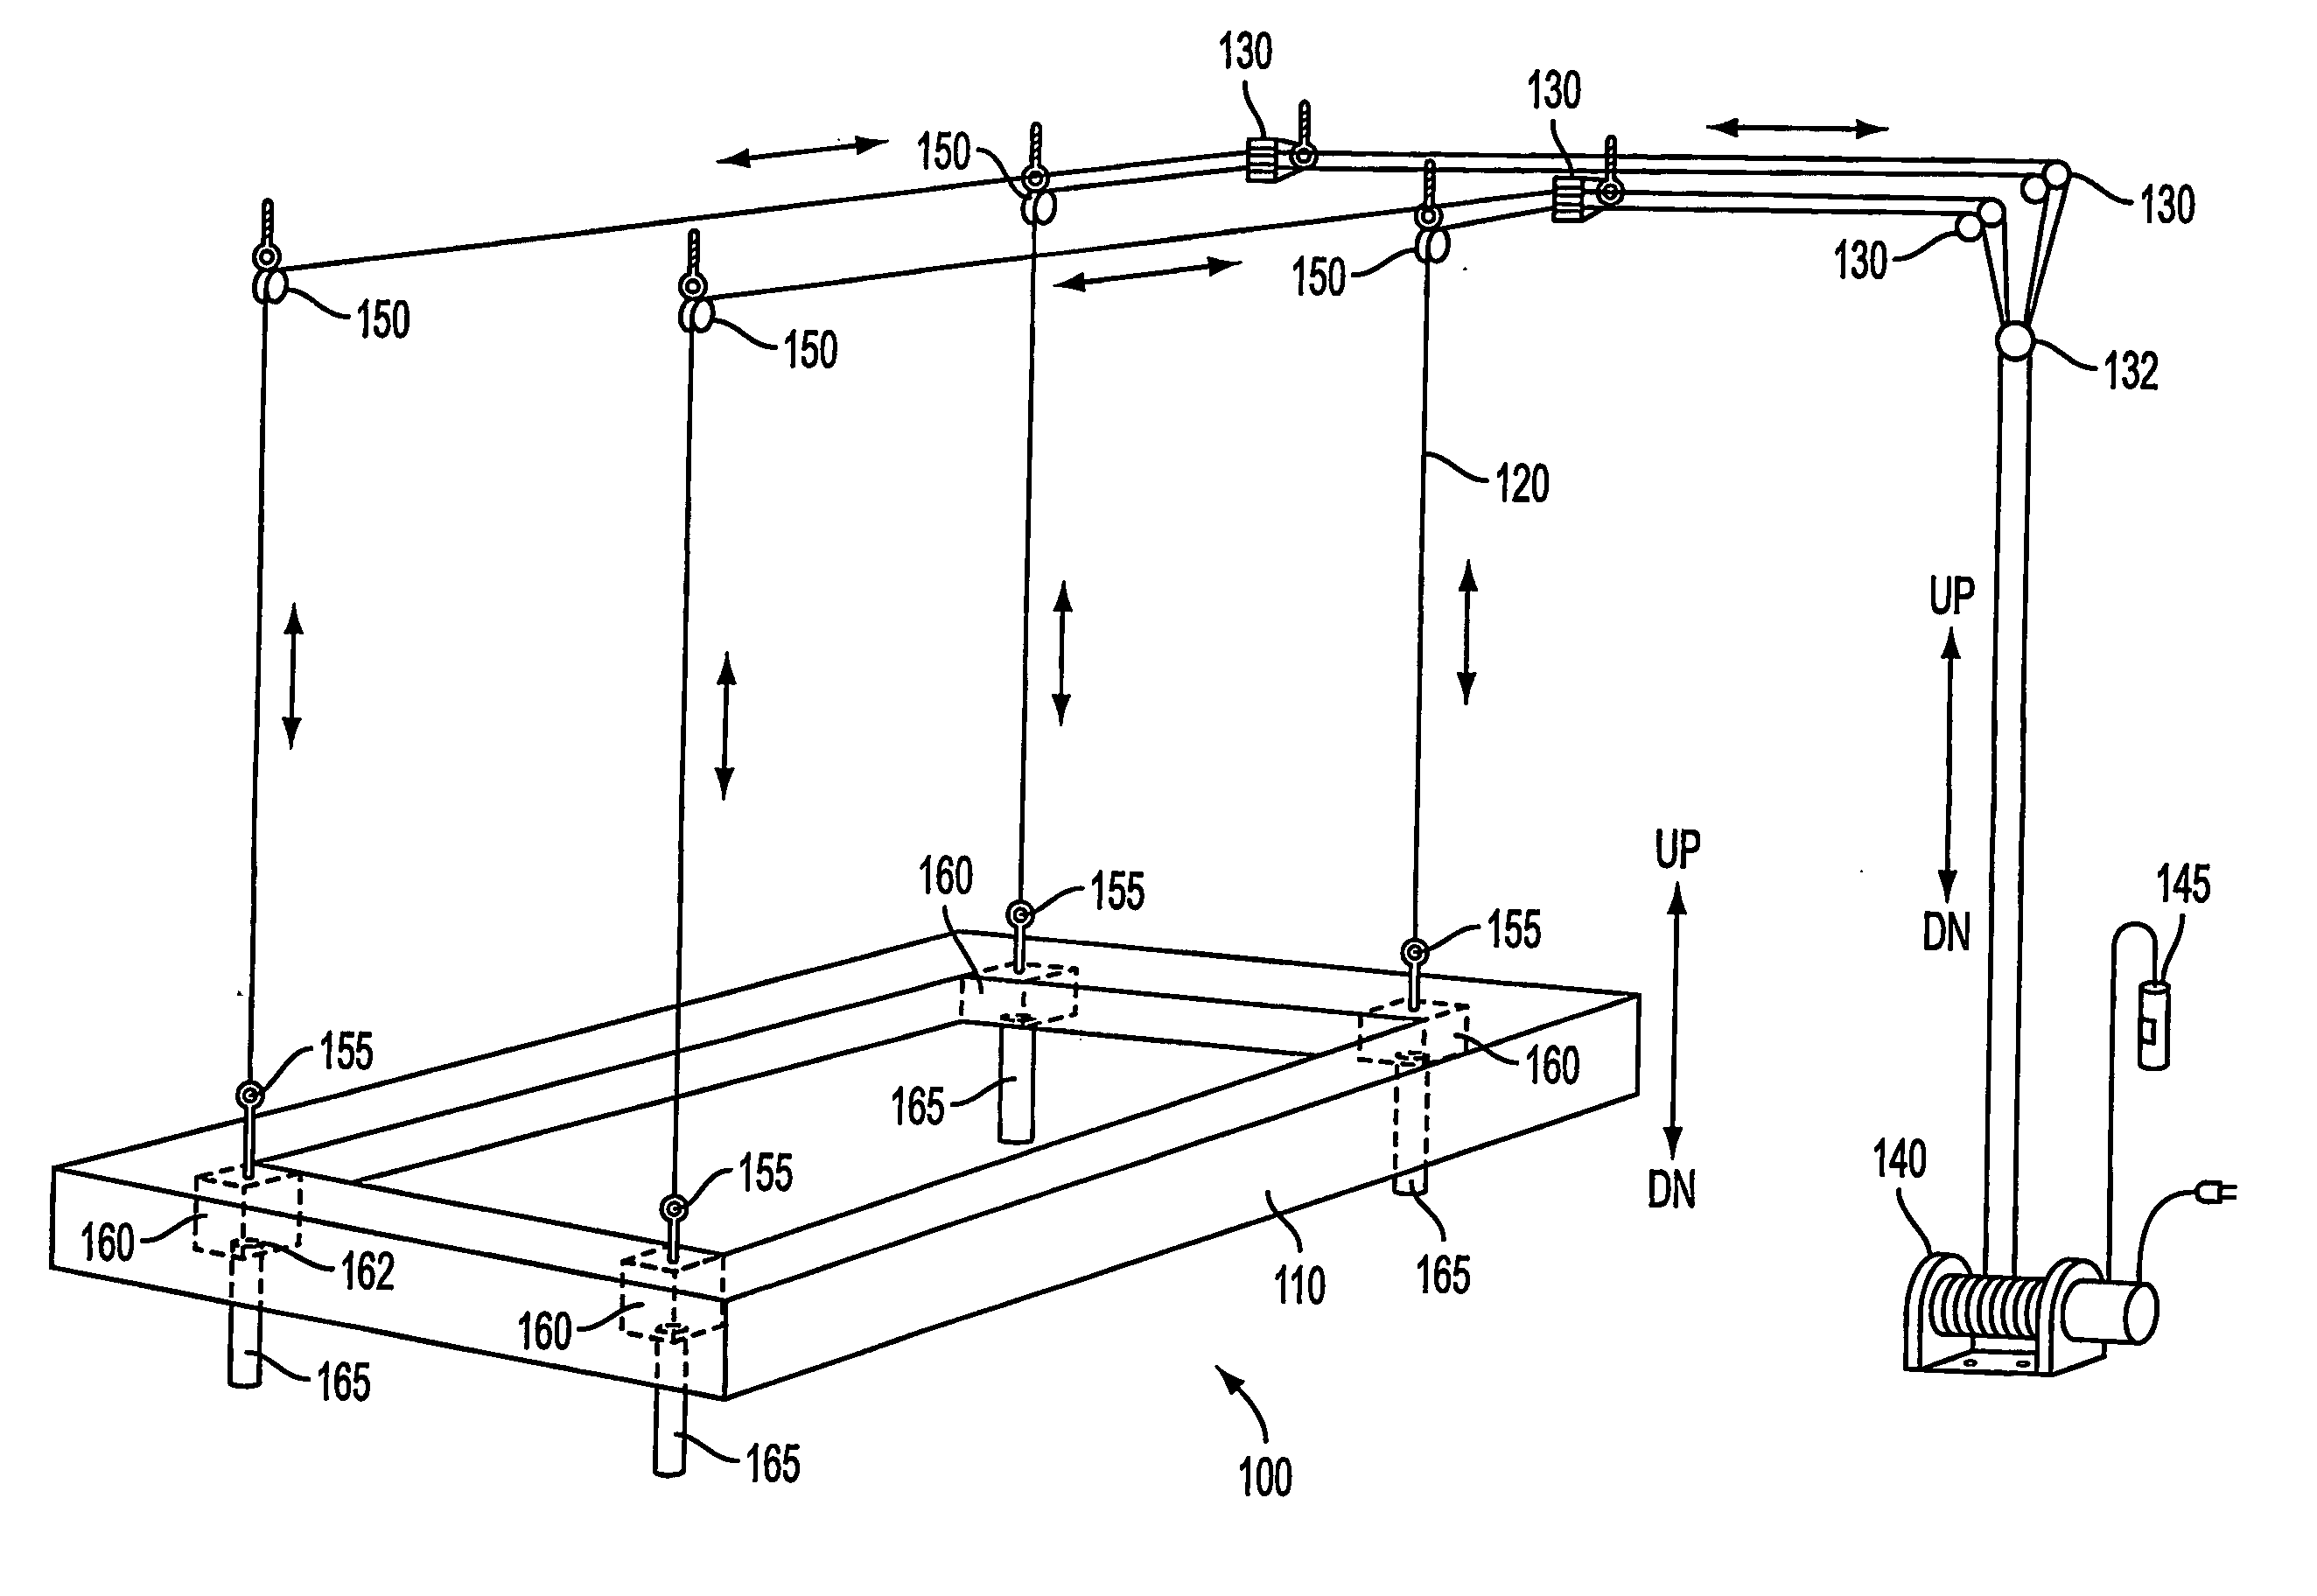 System and method for retractable furniture unit